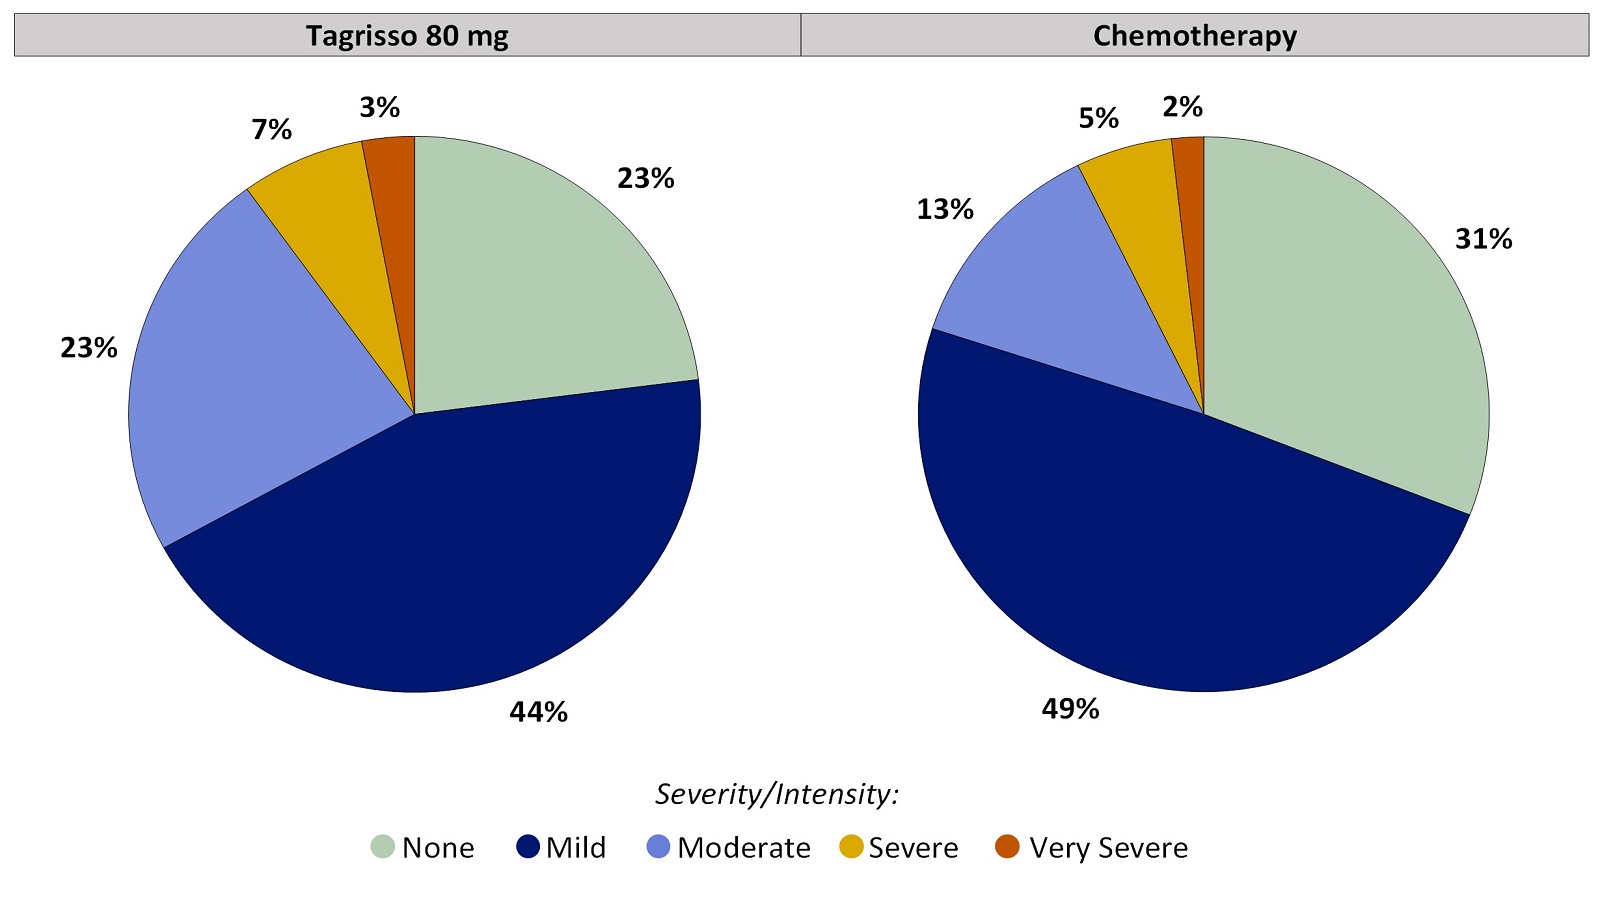 Two pie charts, one for Tagrisso and the other for chemotherapy, summarizing the percentage of patients by worst reported itchy skin during the first 24 weeks of the clinical trial. In the Tagrisso arm, None (23%), Mild (44%), Moderate (23%), Severe (7%) and Very severe (3%). In the chemotherapy arm, None (31%), Mild (49%), Moderate (13%), Severe (5%) and Very severe (2%).